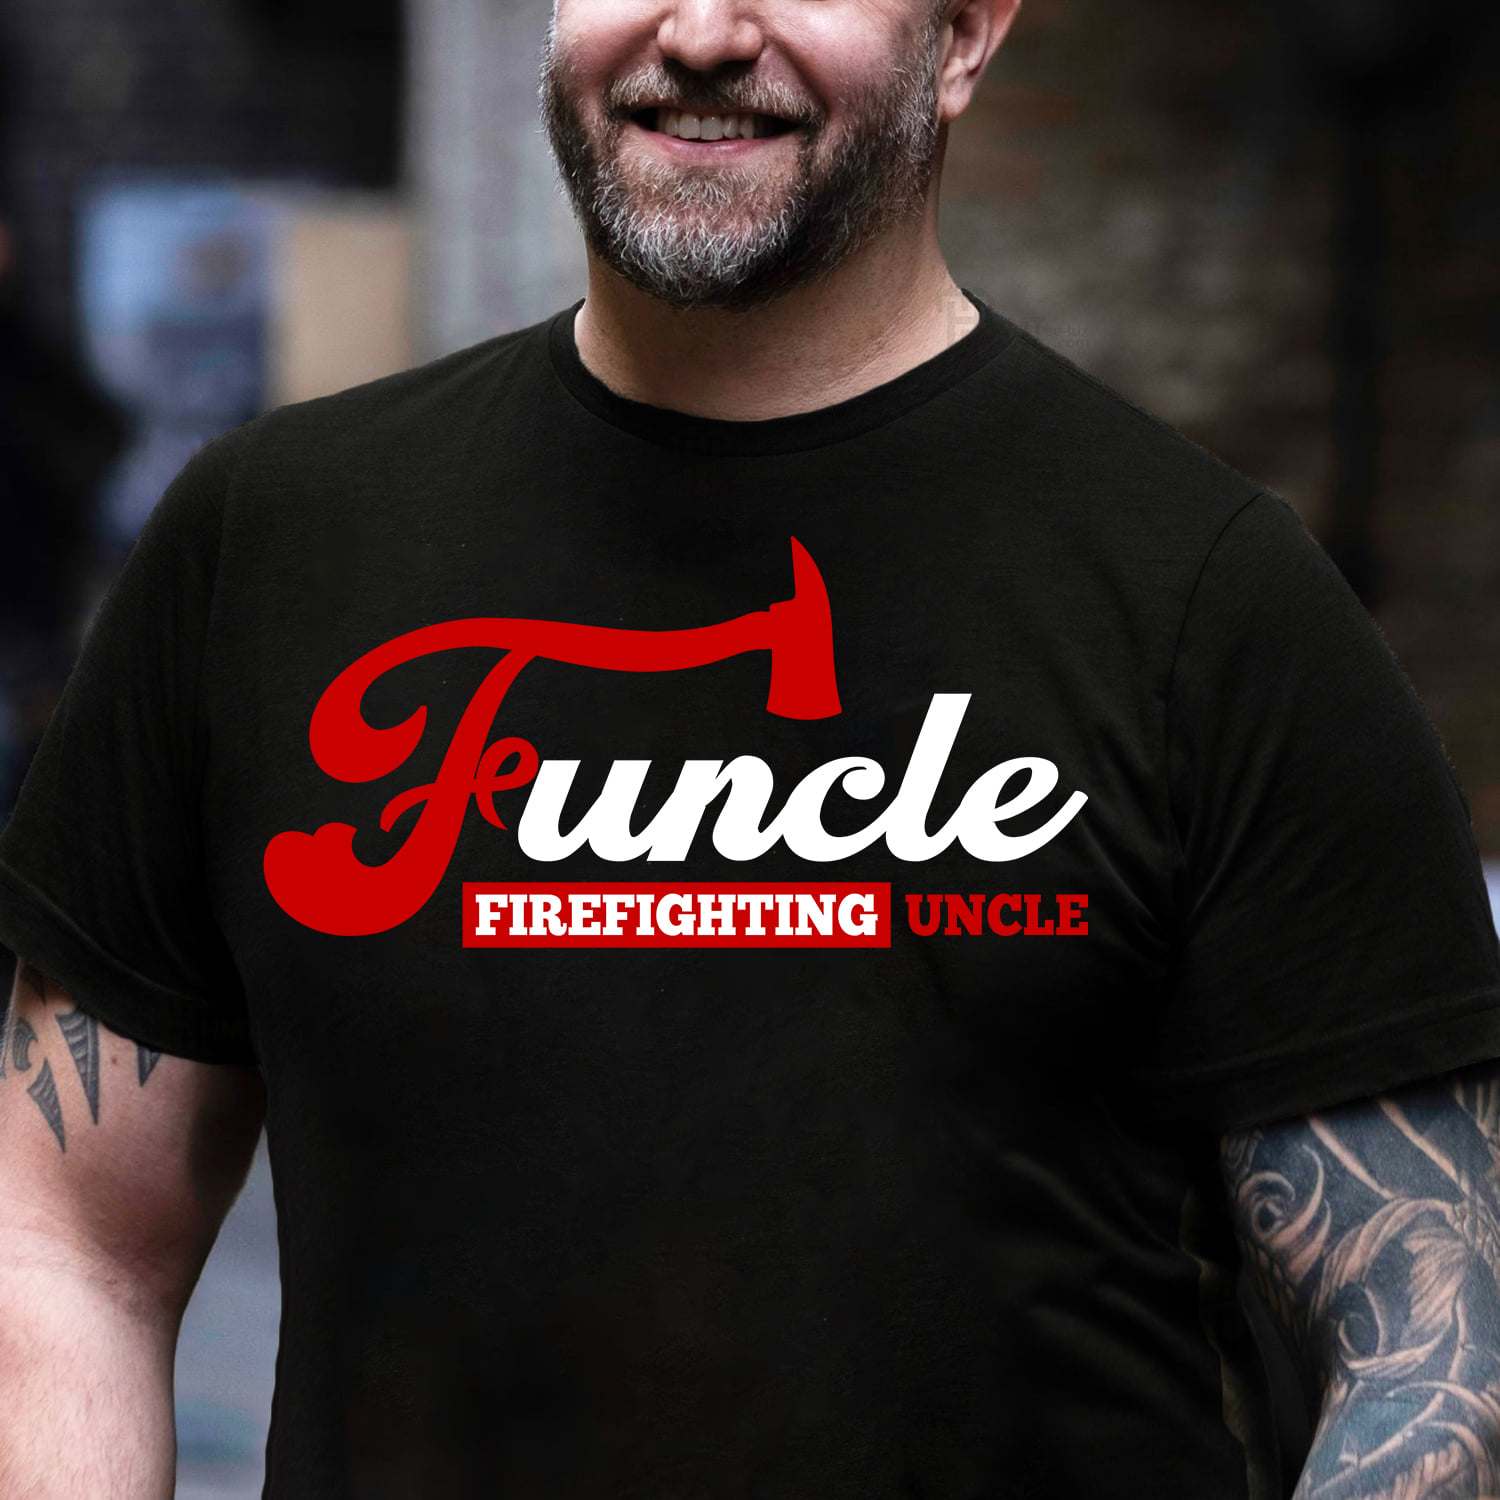 Funcle firefighting uncle - Firefighter the job